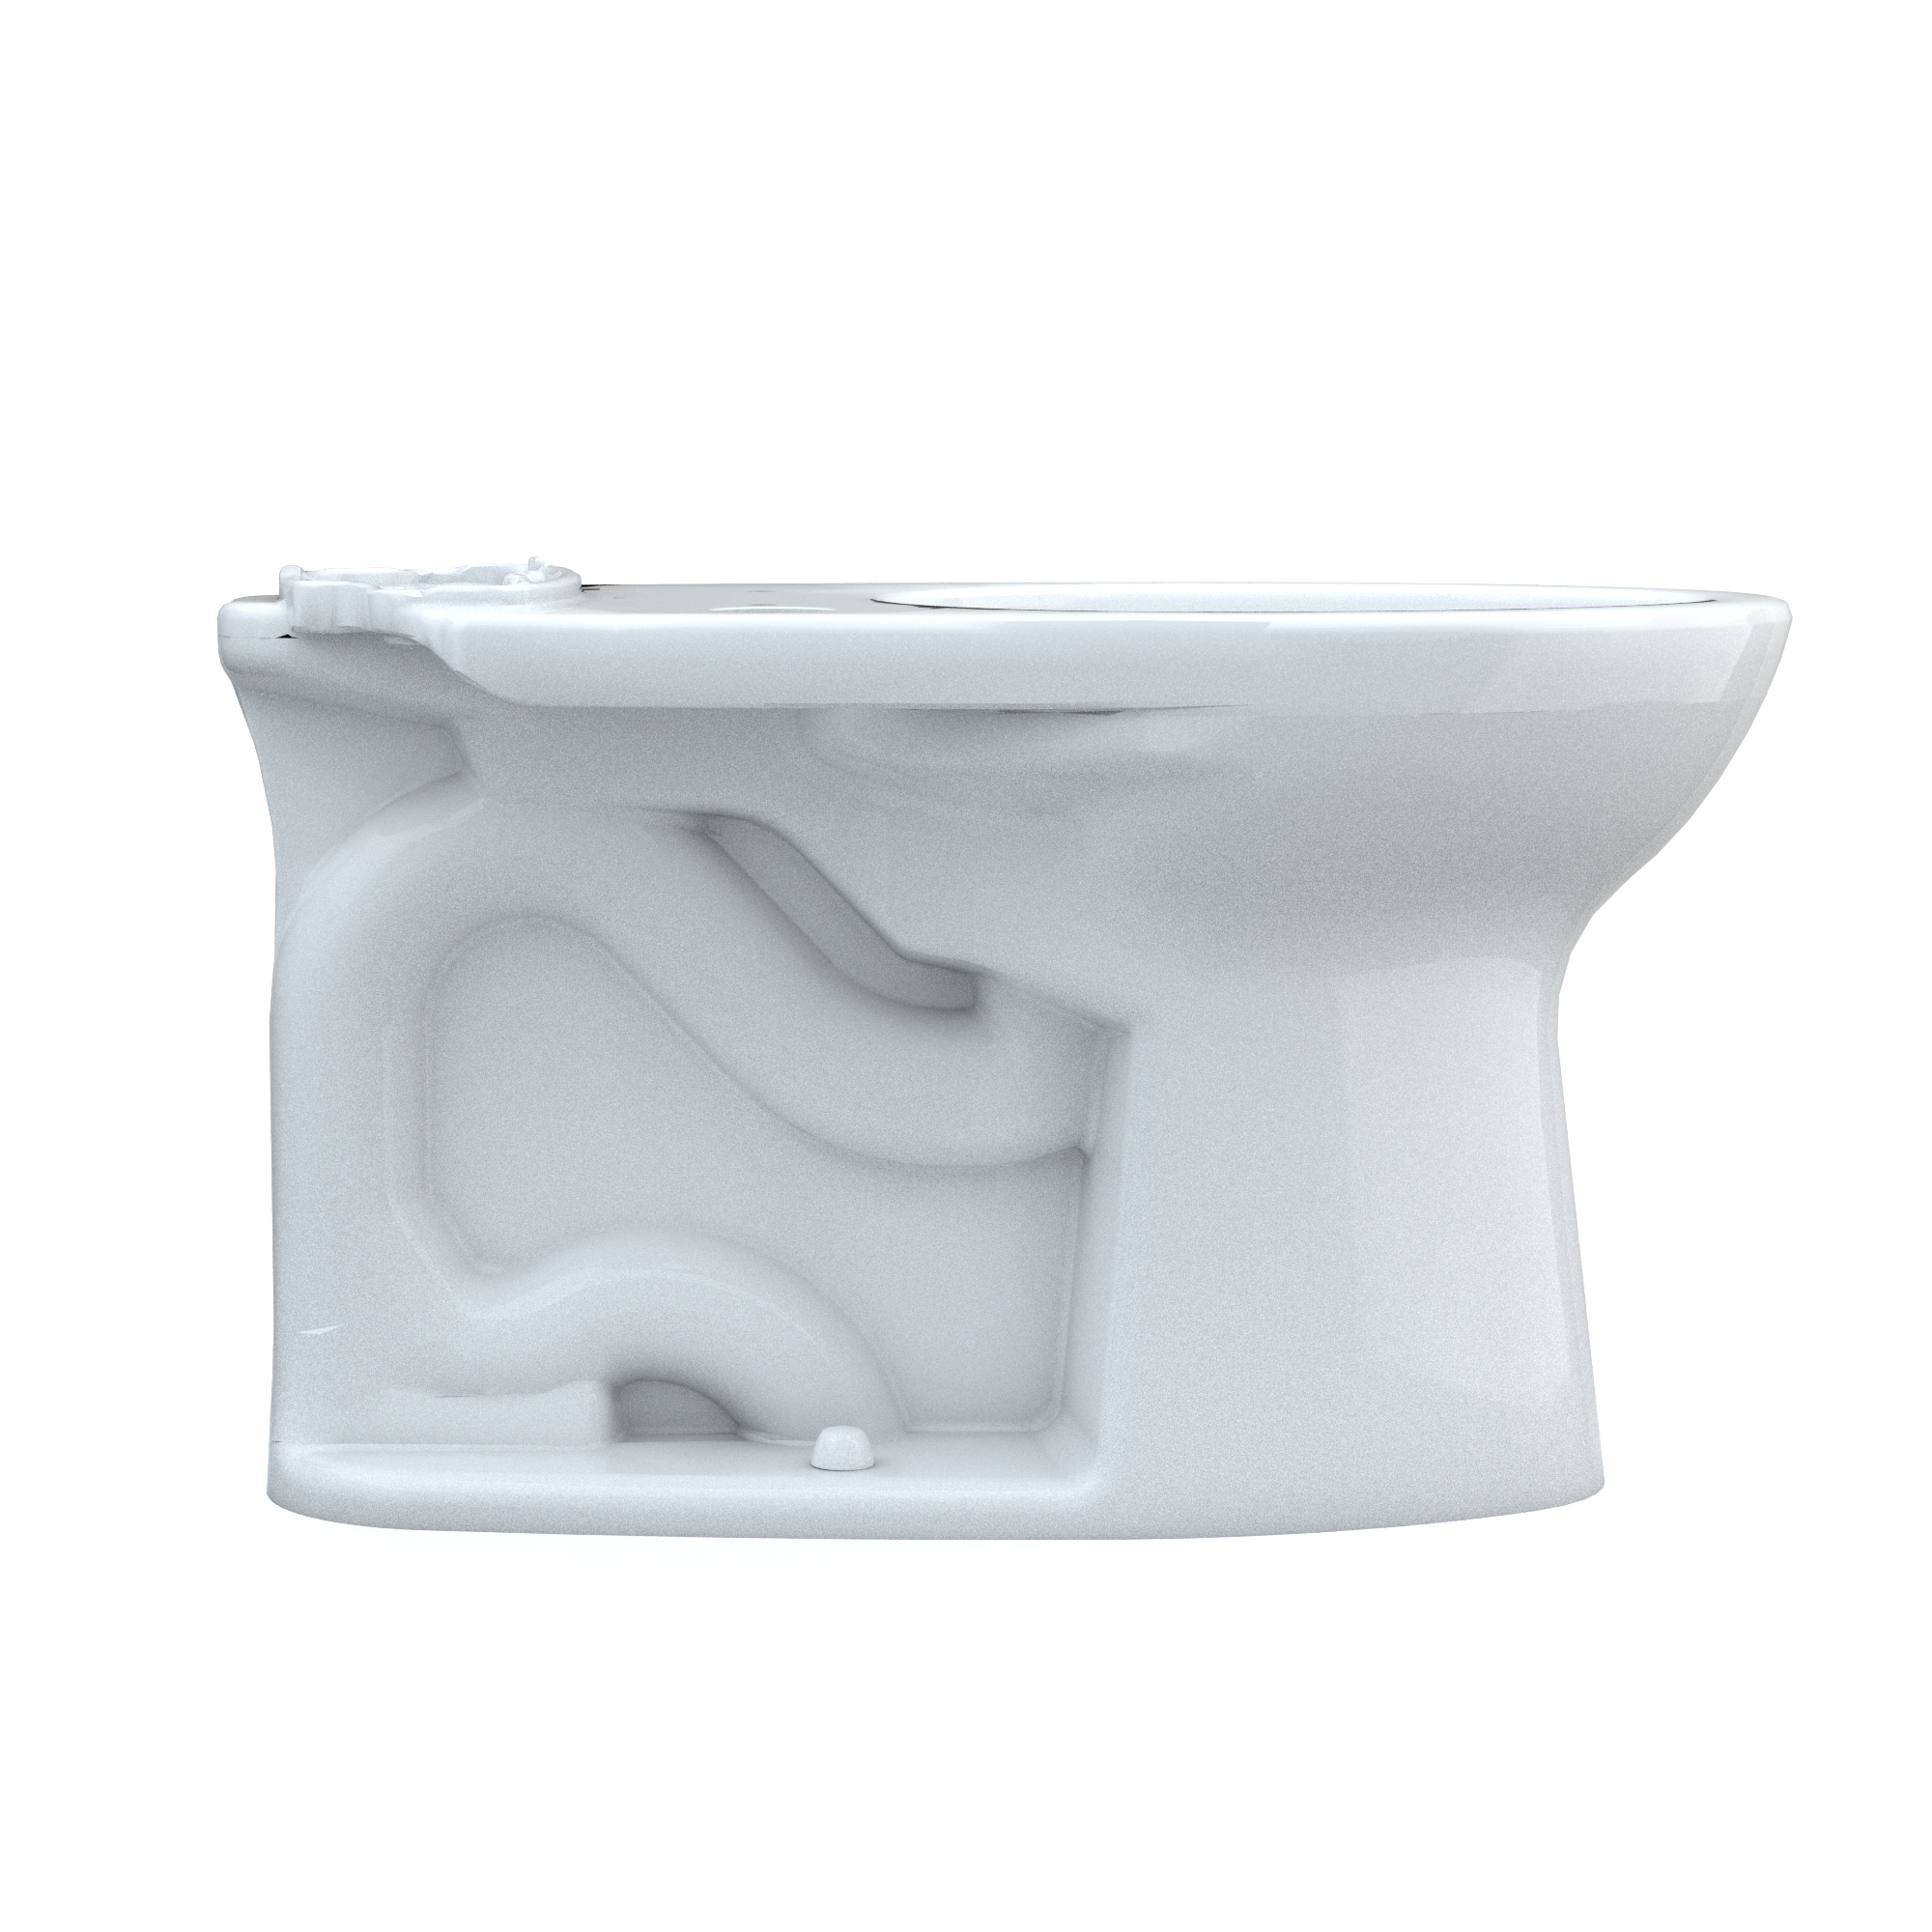 TOTO® Drake® Elongated Universal Height TORNADO FLUSH® Toilet Bowl with CEFIONTECT®, WASHLET®+ Ready, Cotton White - C776CEFGT40#01 - image 2 of 5